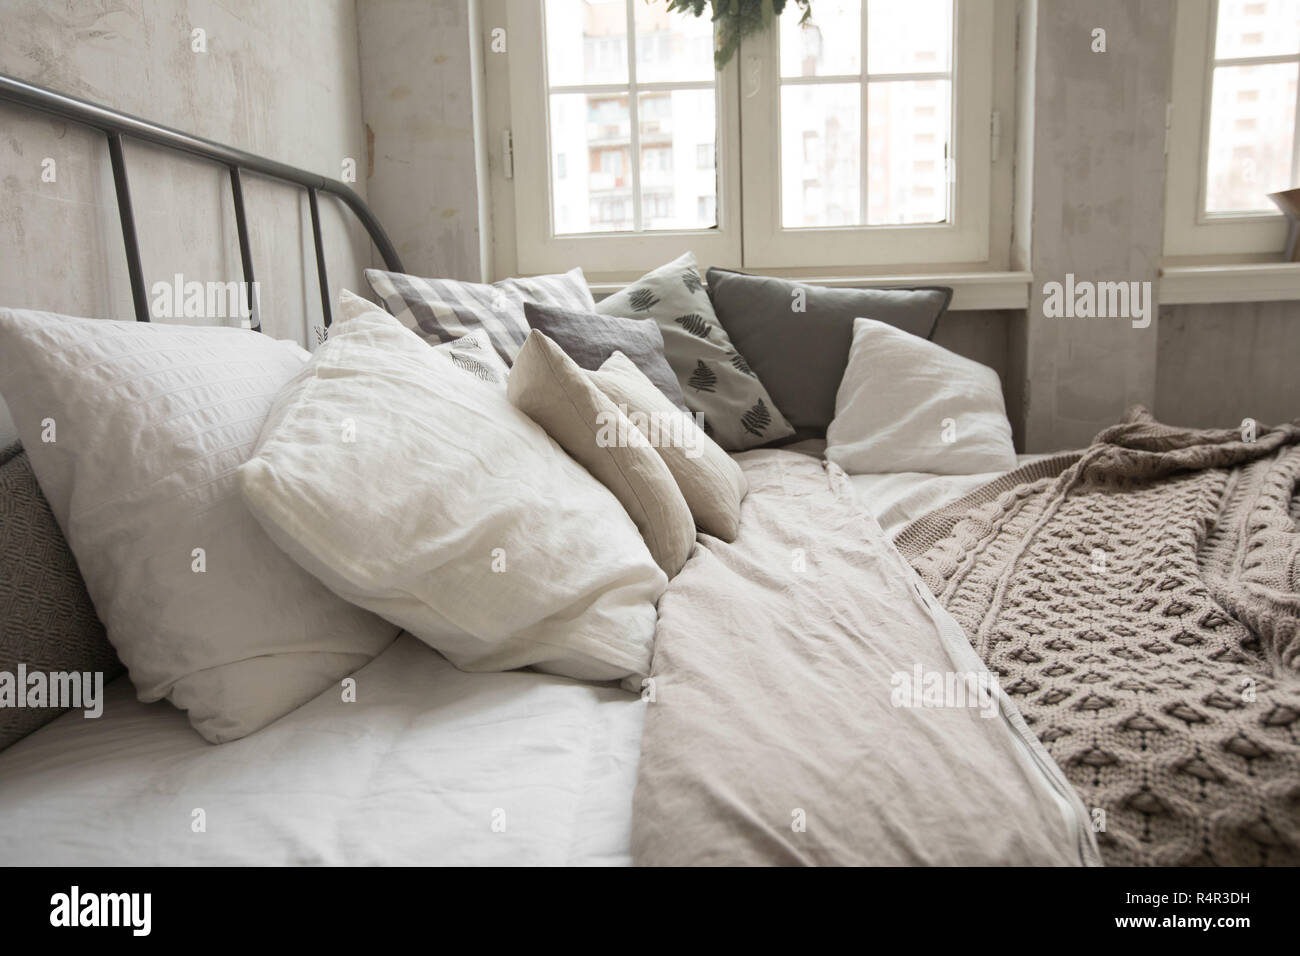 Pillows on comfortable bed Stock Photo